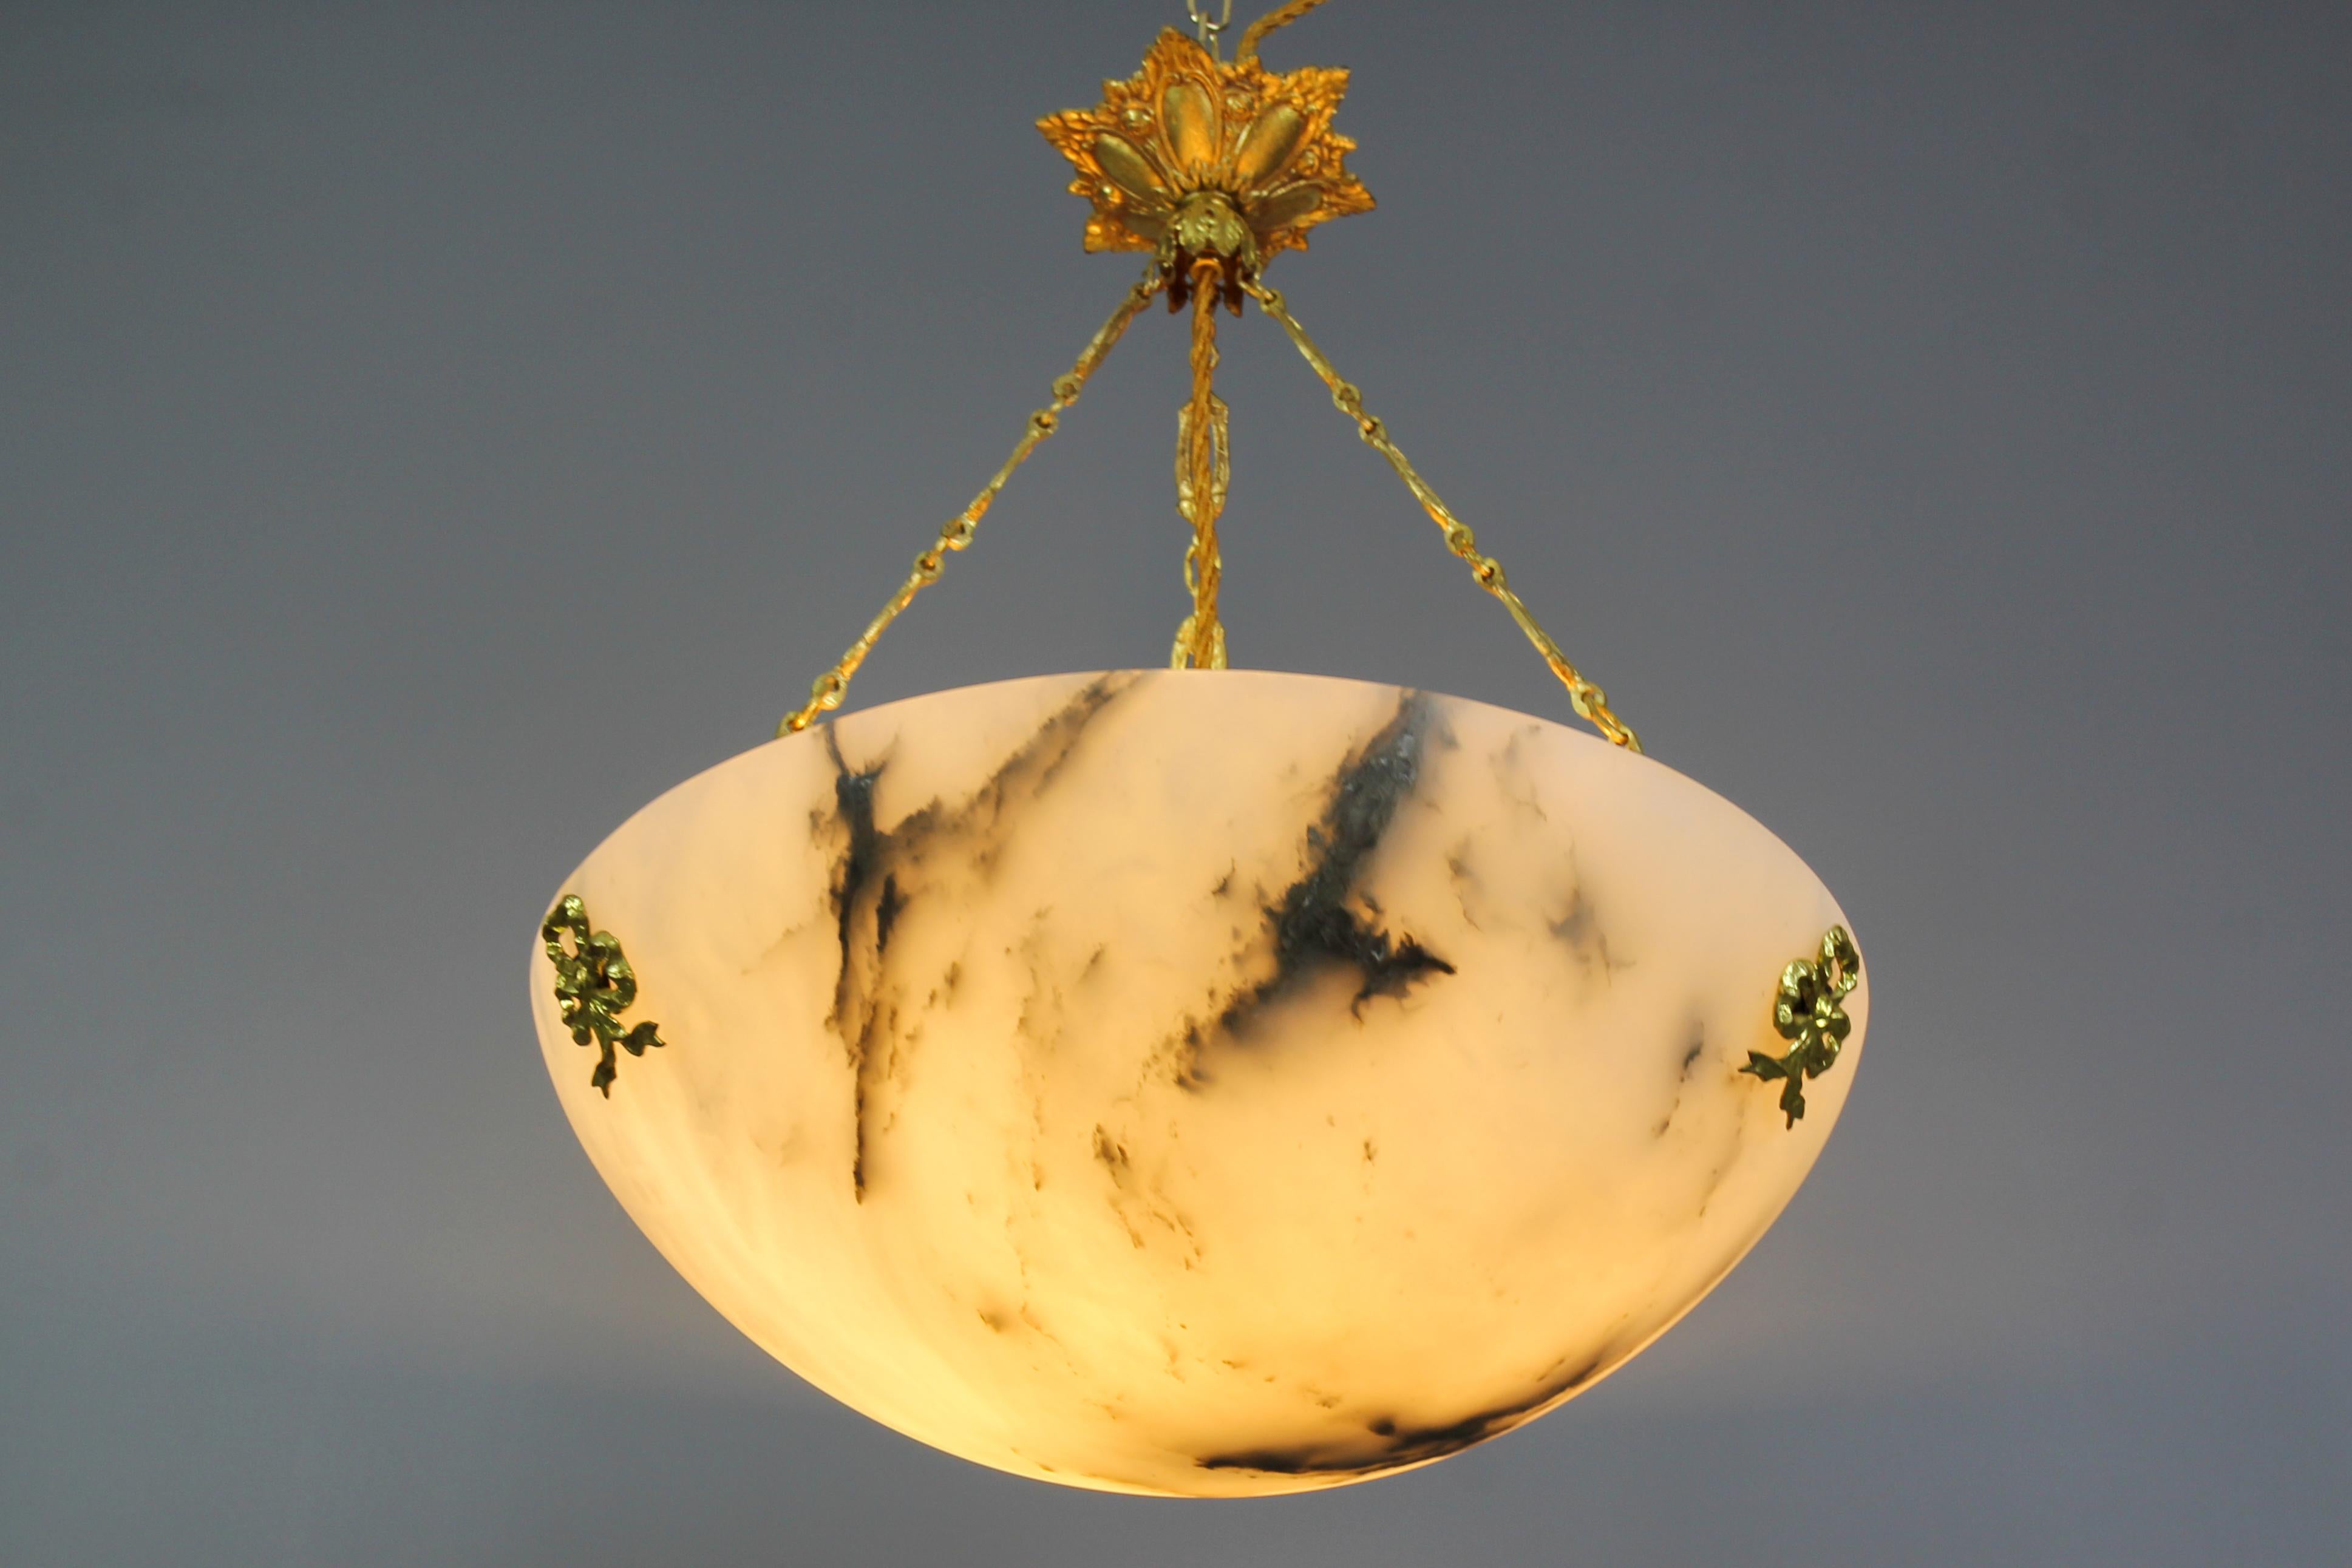 A refined Art Deco white alabaster pendant ceiling light fixture with dark brown and black veins. France, 1920s. This masterfully carved and beautifully veined one-piece alabaster bowl is suspended by three ornate bronze and brass chains and a